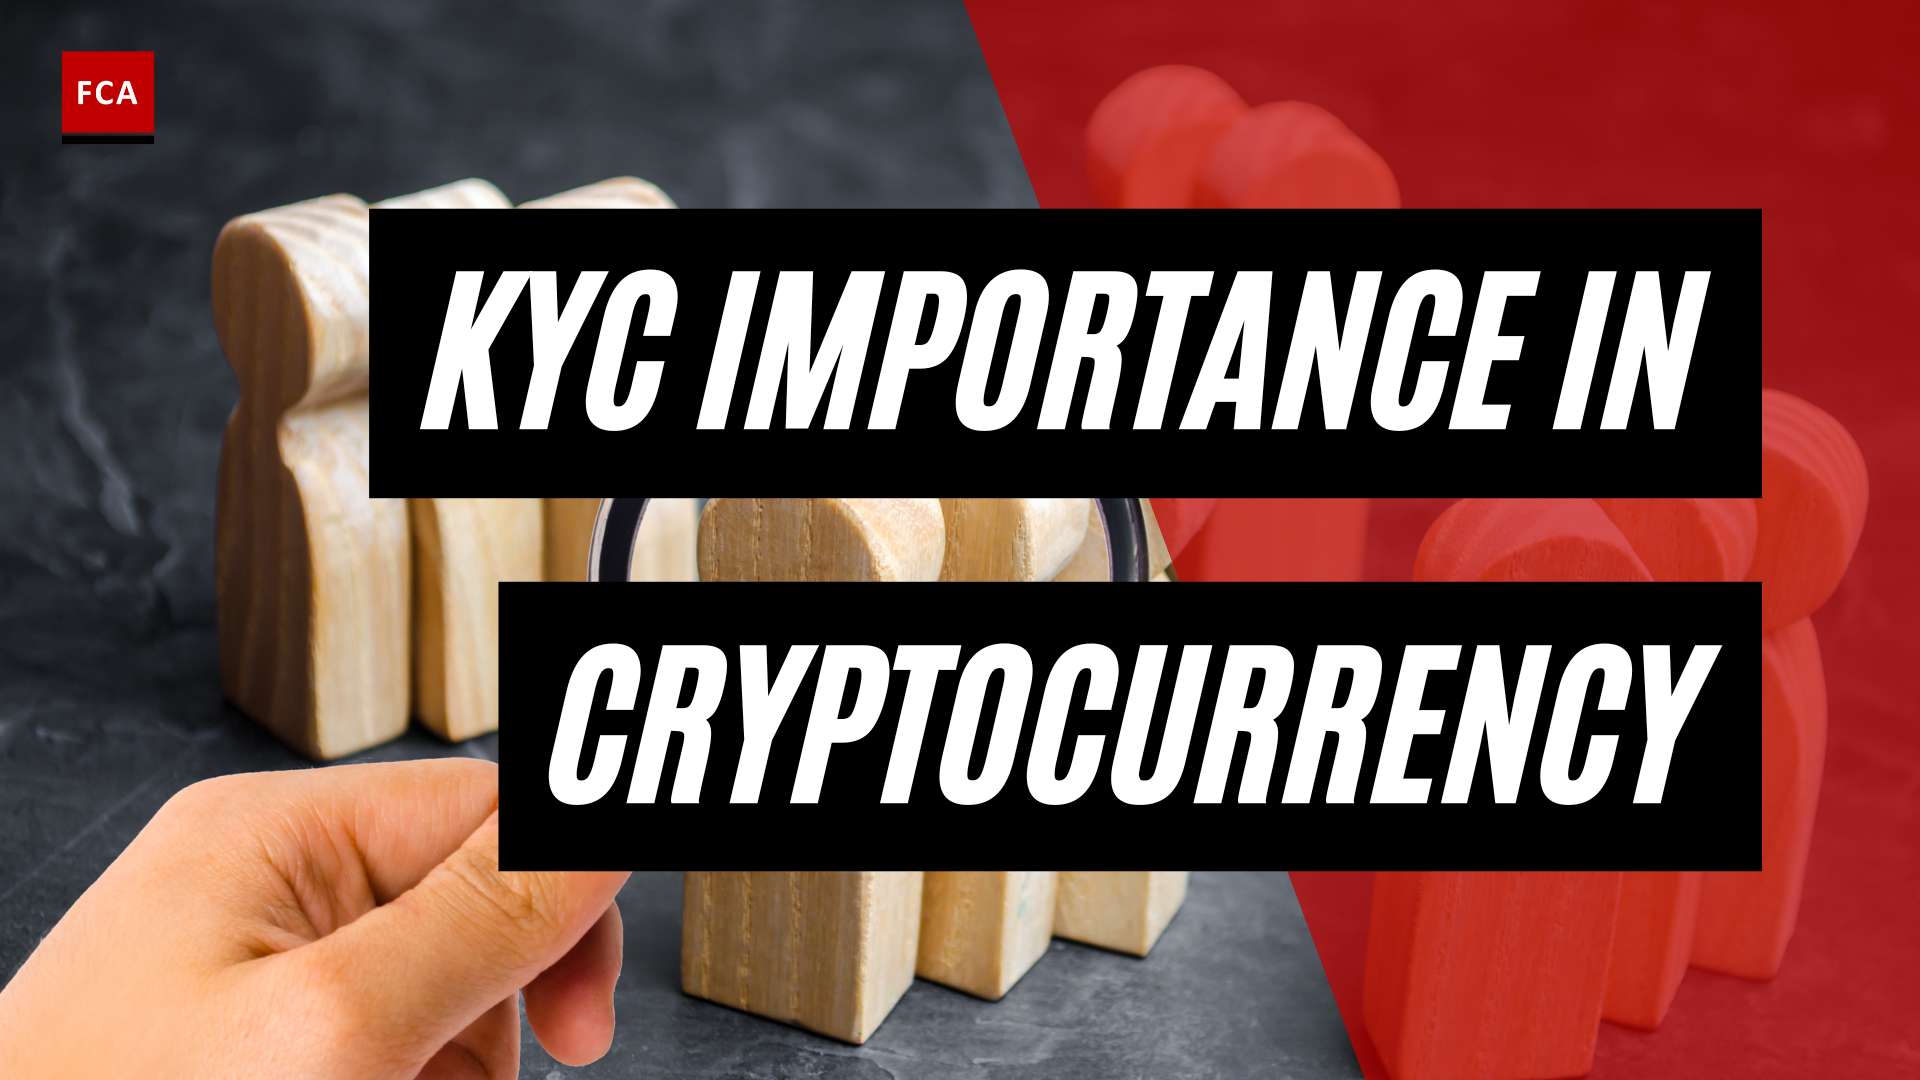 From Anonymity To Accountability: The Importance Of Cryptocurrency Kyc Requirements